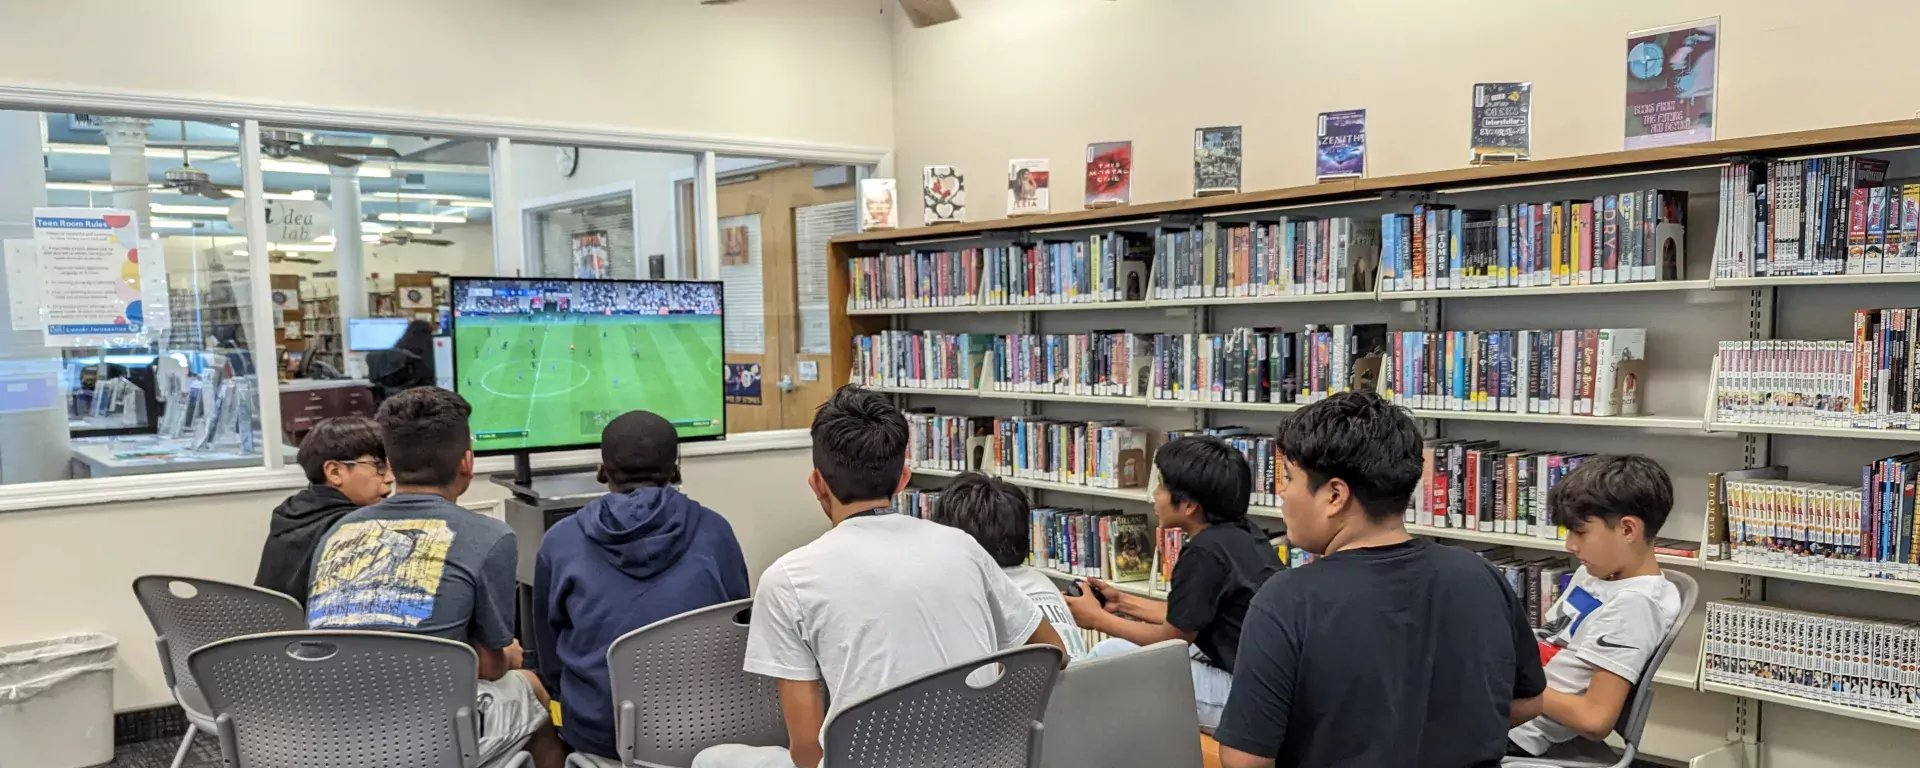 a group of young people in a library, situated in a room filled with bookshelves that are stocked with a wide variety of books. They are seated on metal chairs, arranged in a semi-circle facing a television screen displaying a soccer game. The atmosphere seems casual and comfortable, indicating a community space that encourages leisure activities alongside reading. There are books prominently displayed on the top of the shelves, and the environment suggests a well-maintained public space.